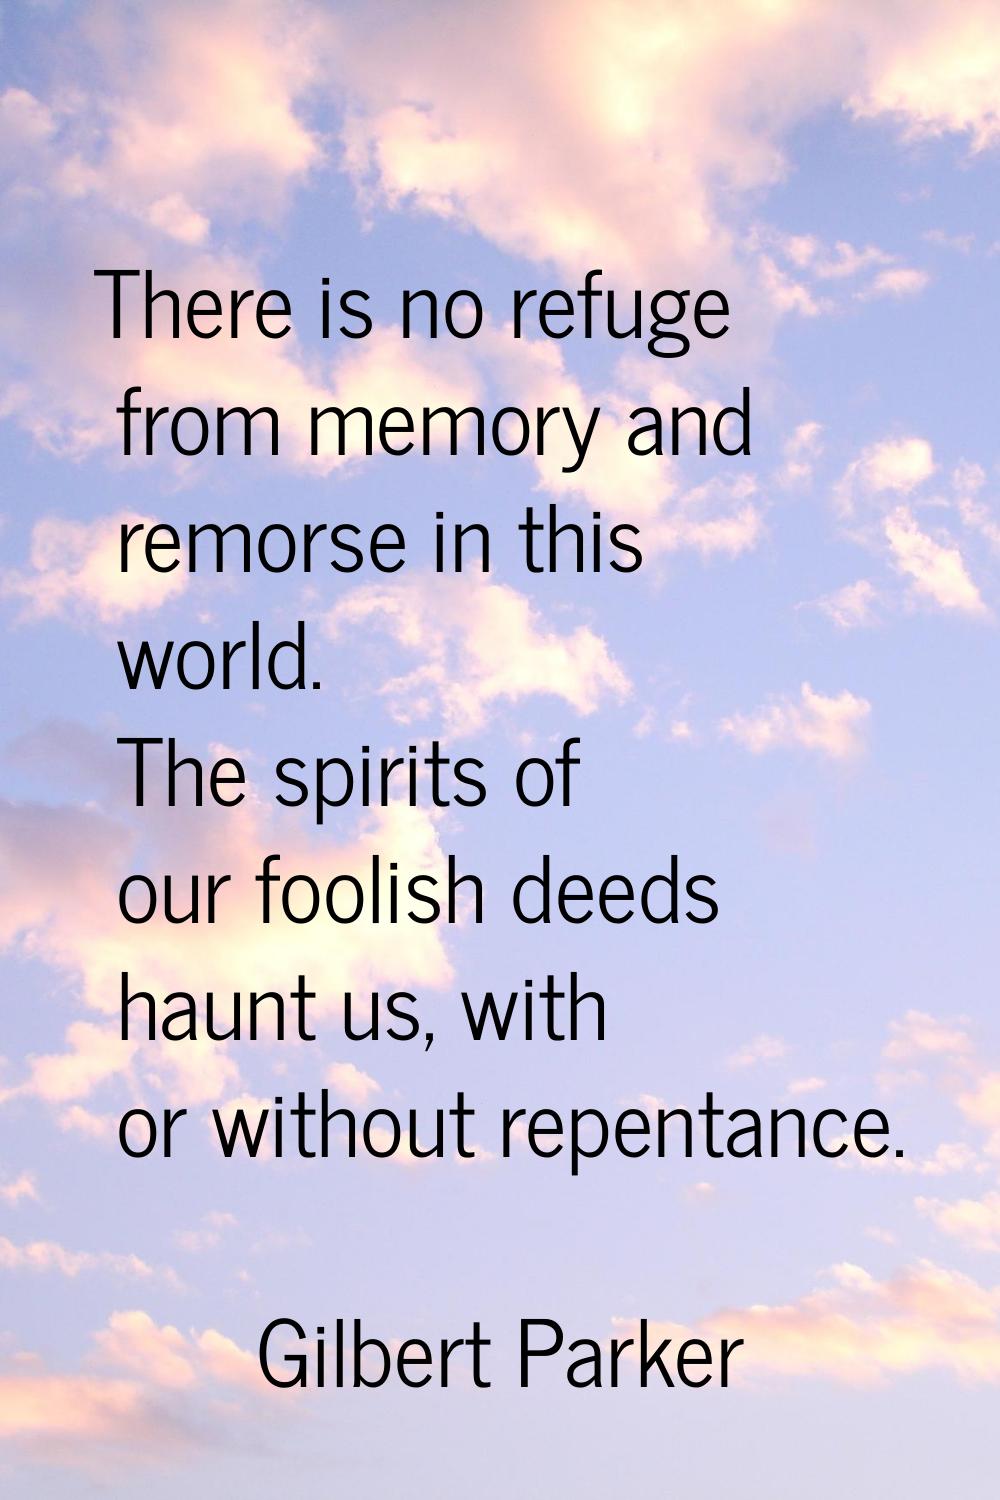 There is no refuge from memory and remorse in this world. The spirits of our foolish deeds haunt us